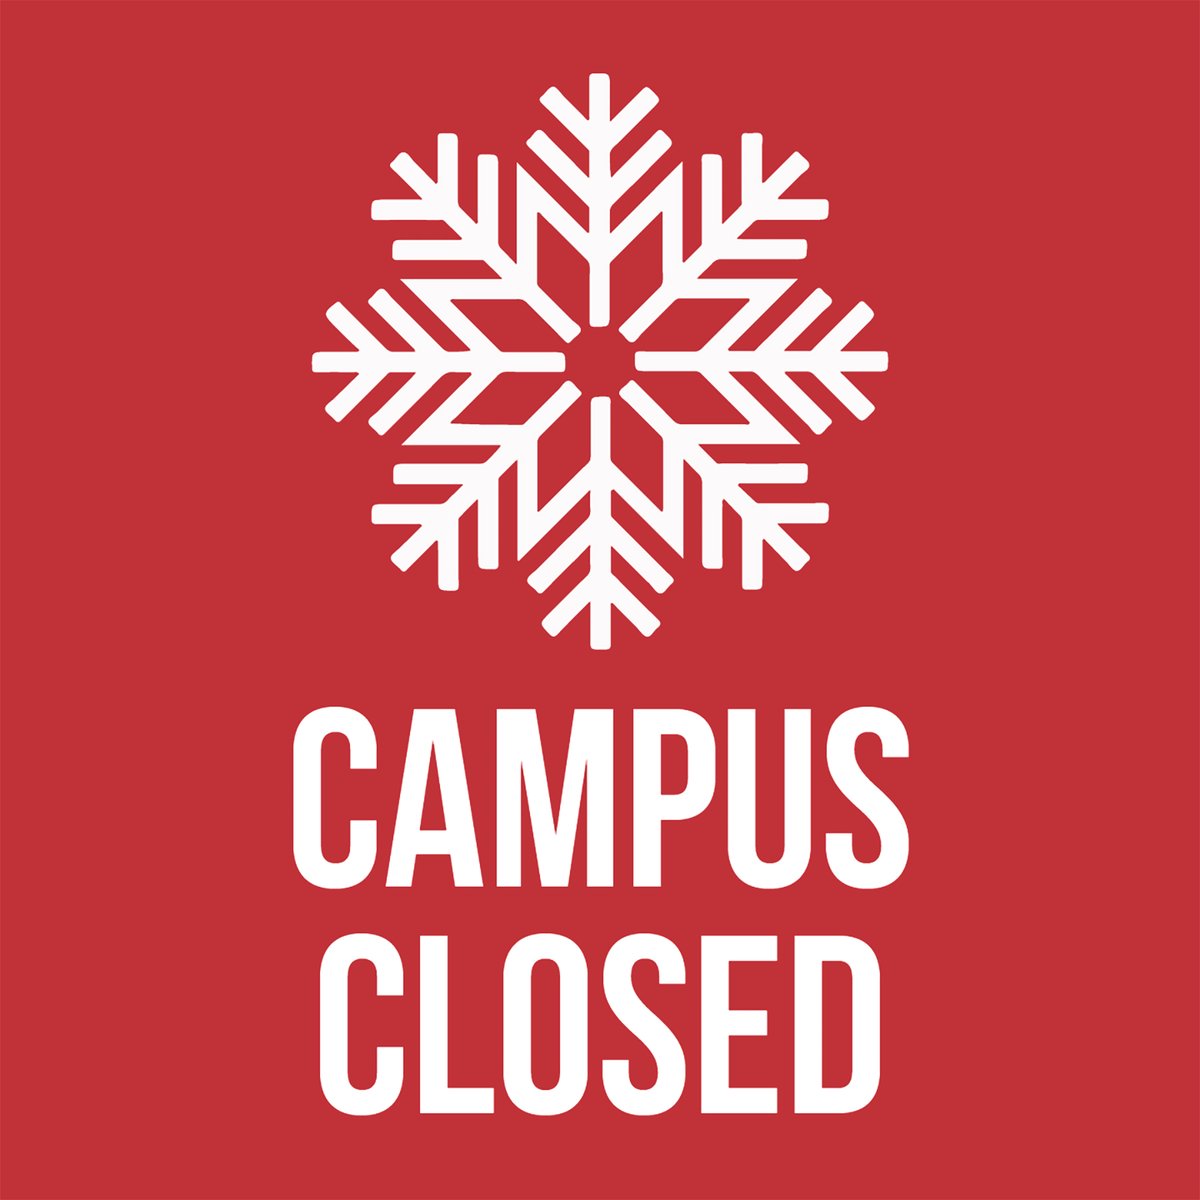 Due to hazardous weather and driving conditions, the campus will be closed tomorrow, January 16. Online classes remain unaffected. Virtual work for employees may continue where possible. Stay tuned for further updates.